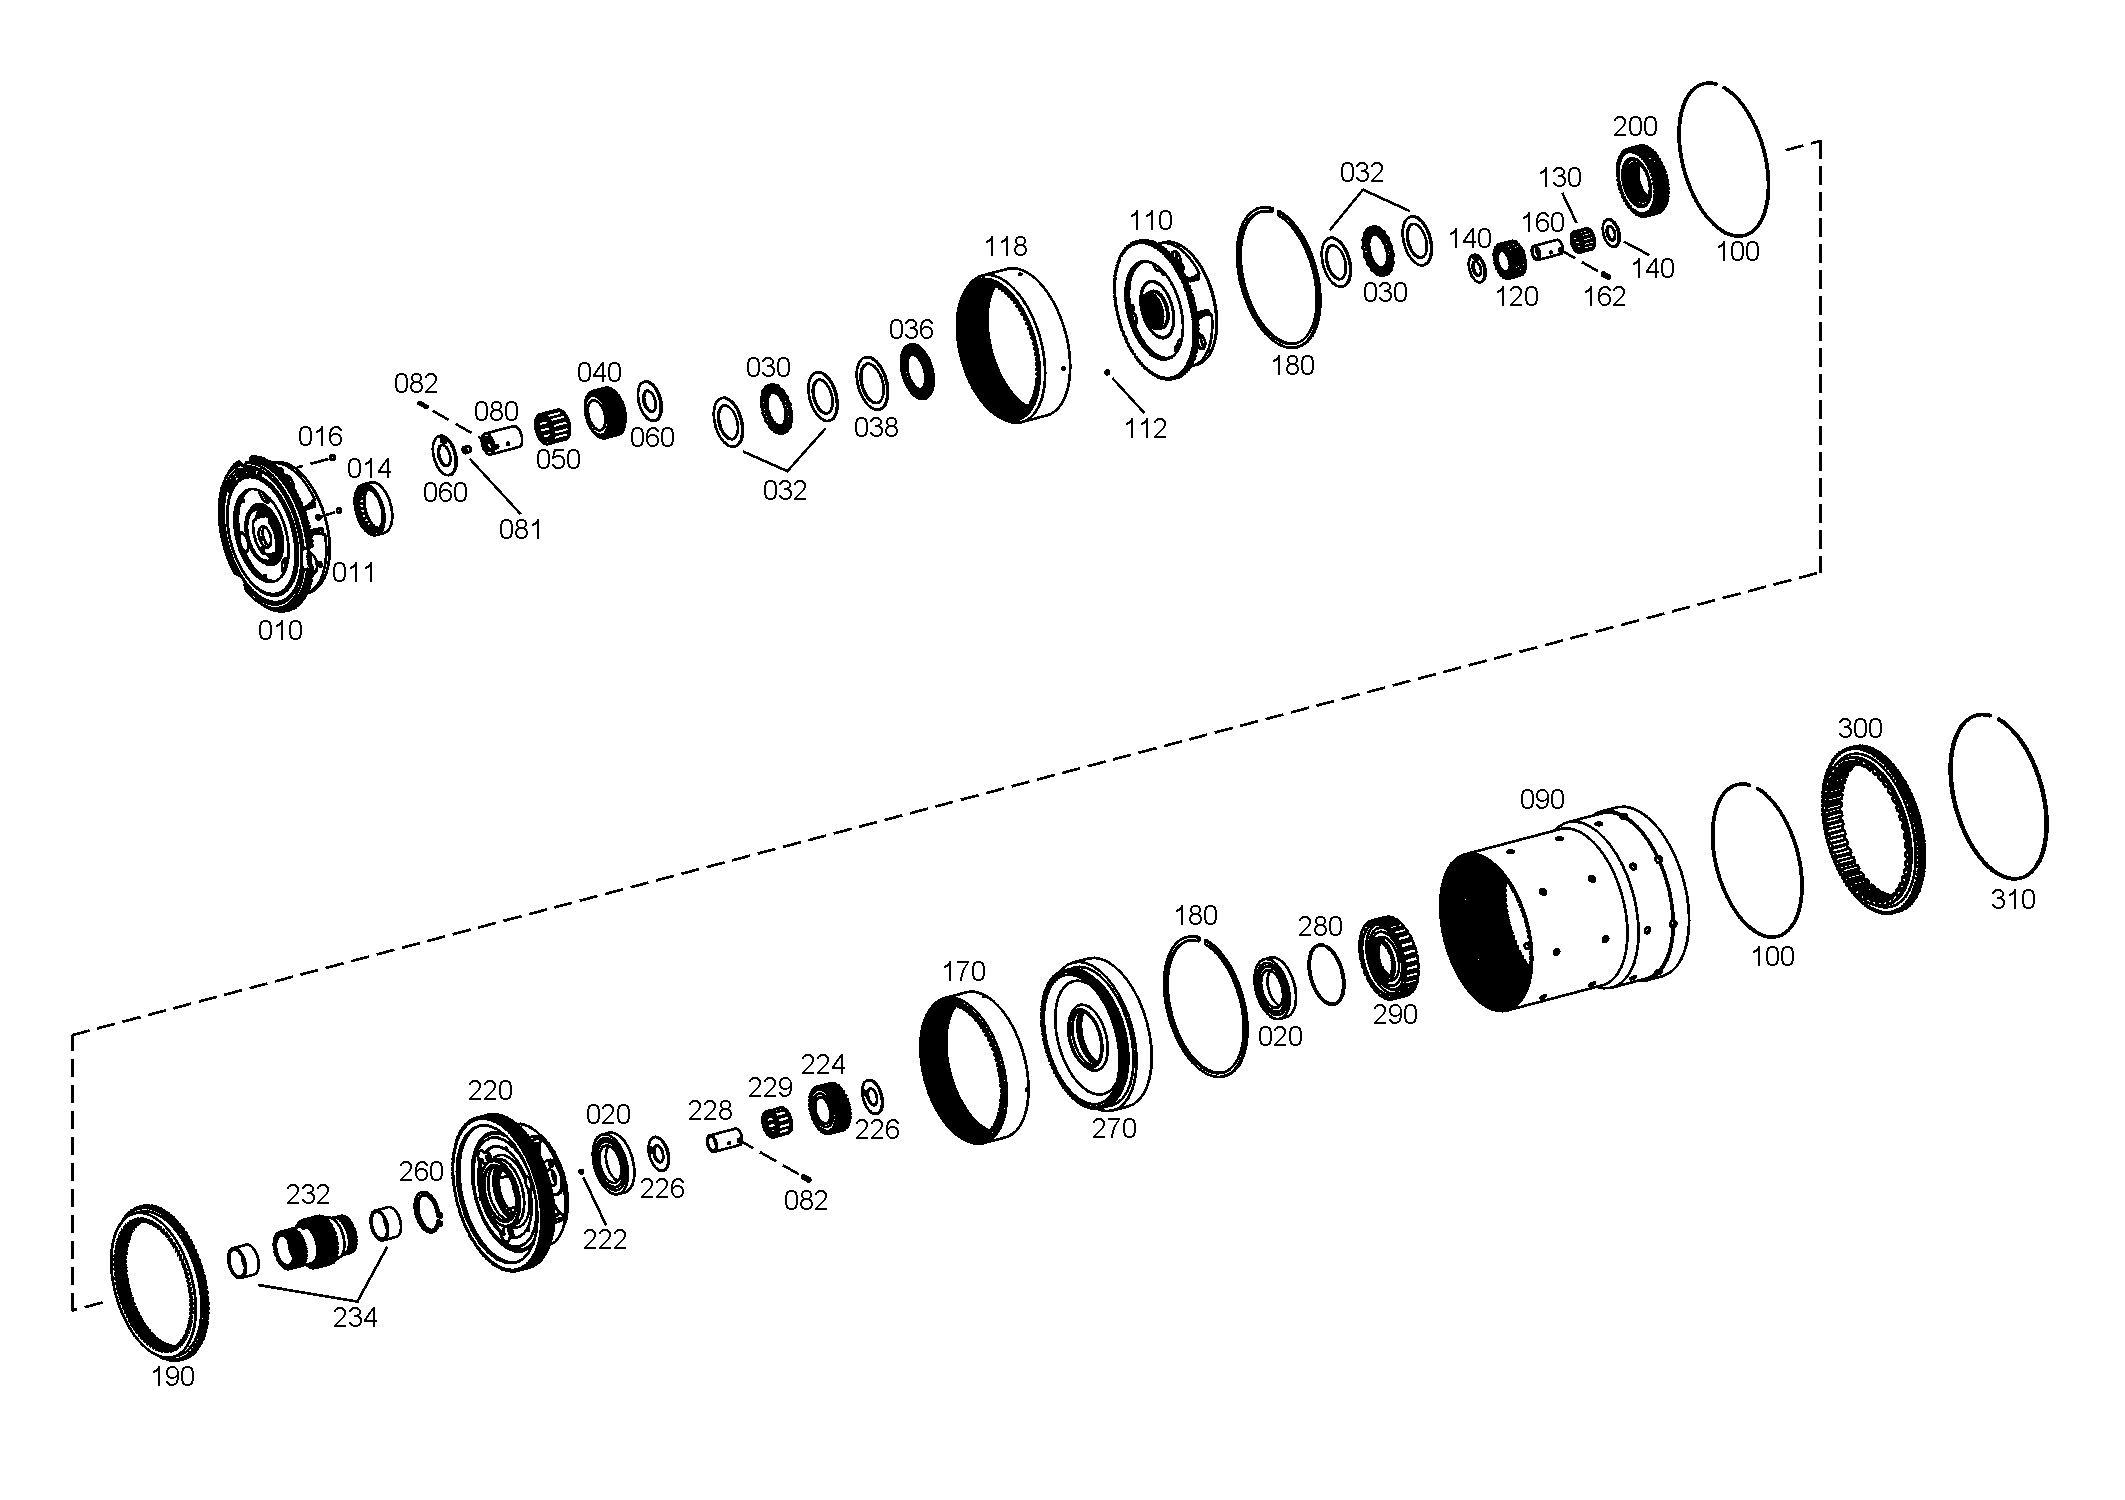 drawing for PPM 09397960 - BALL BEARING (figure 2)